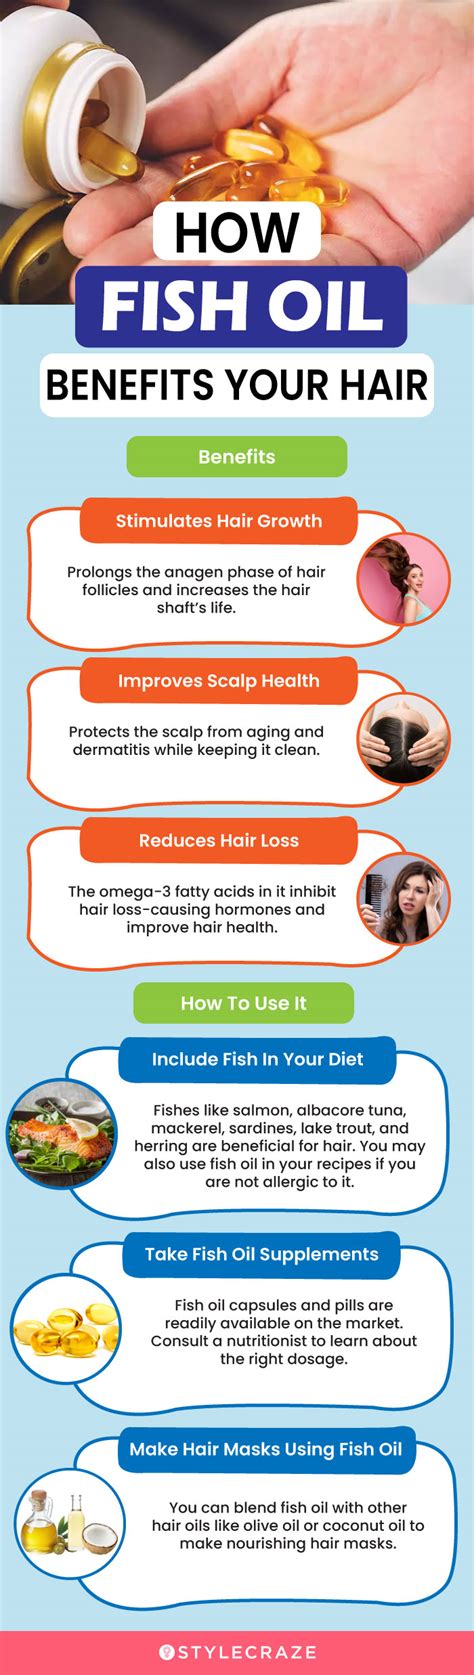 Conclusion fish oils for hair